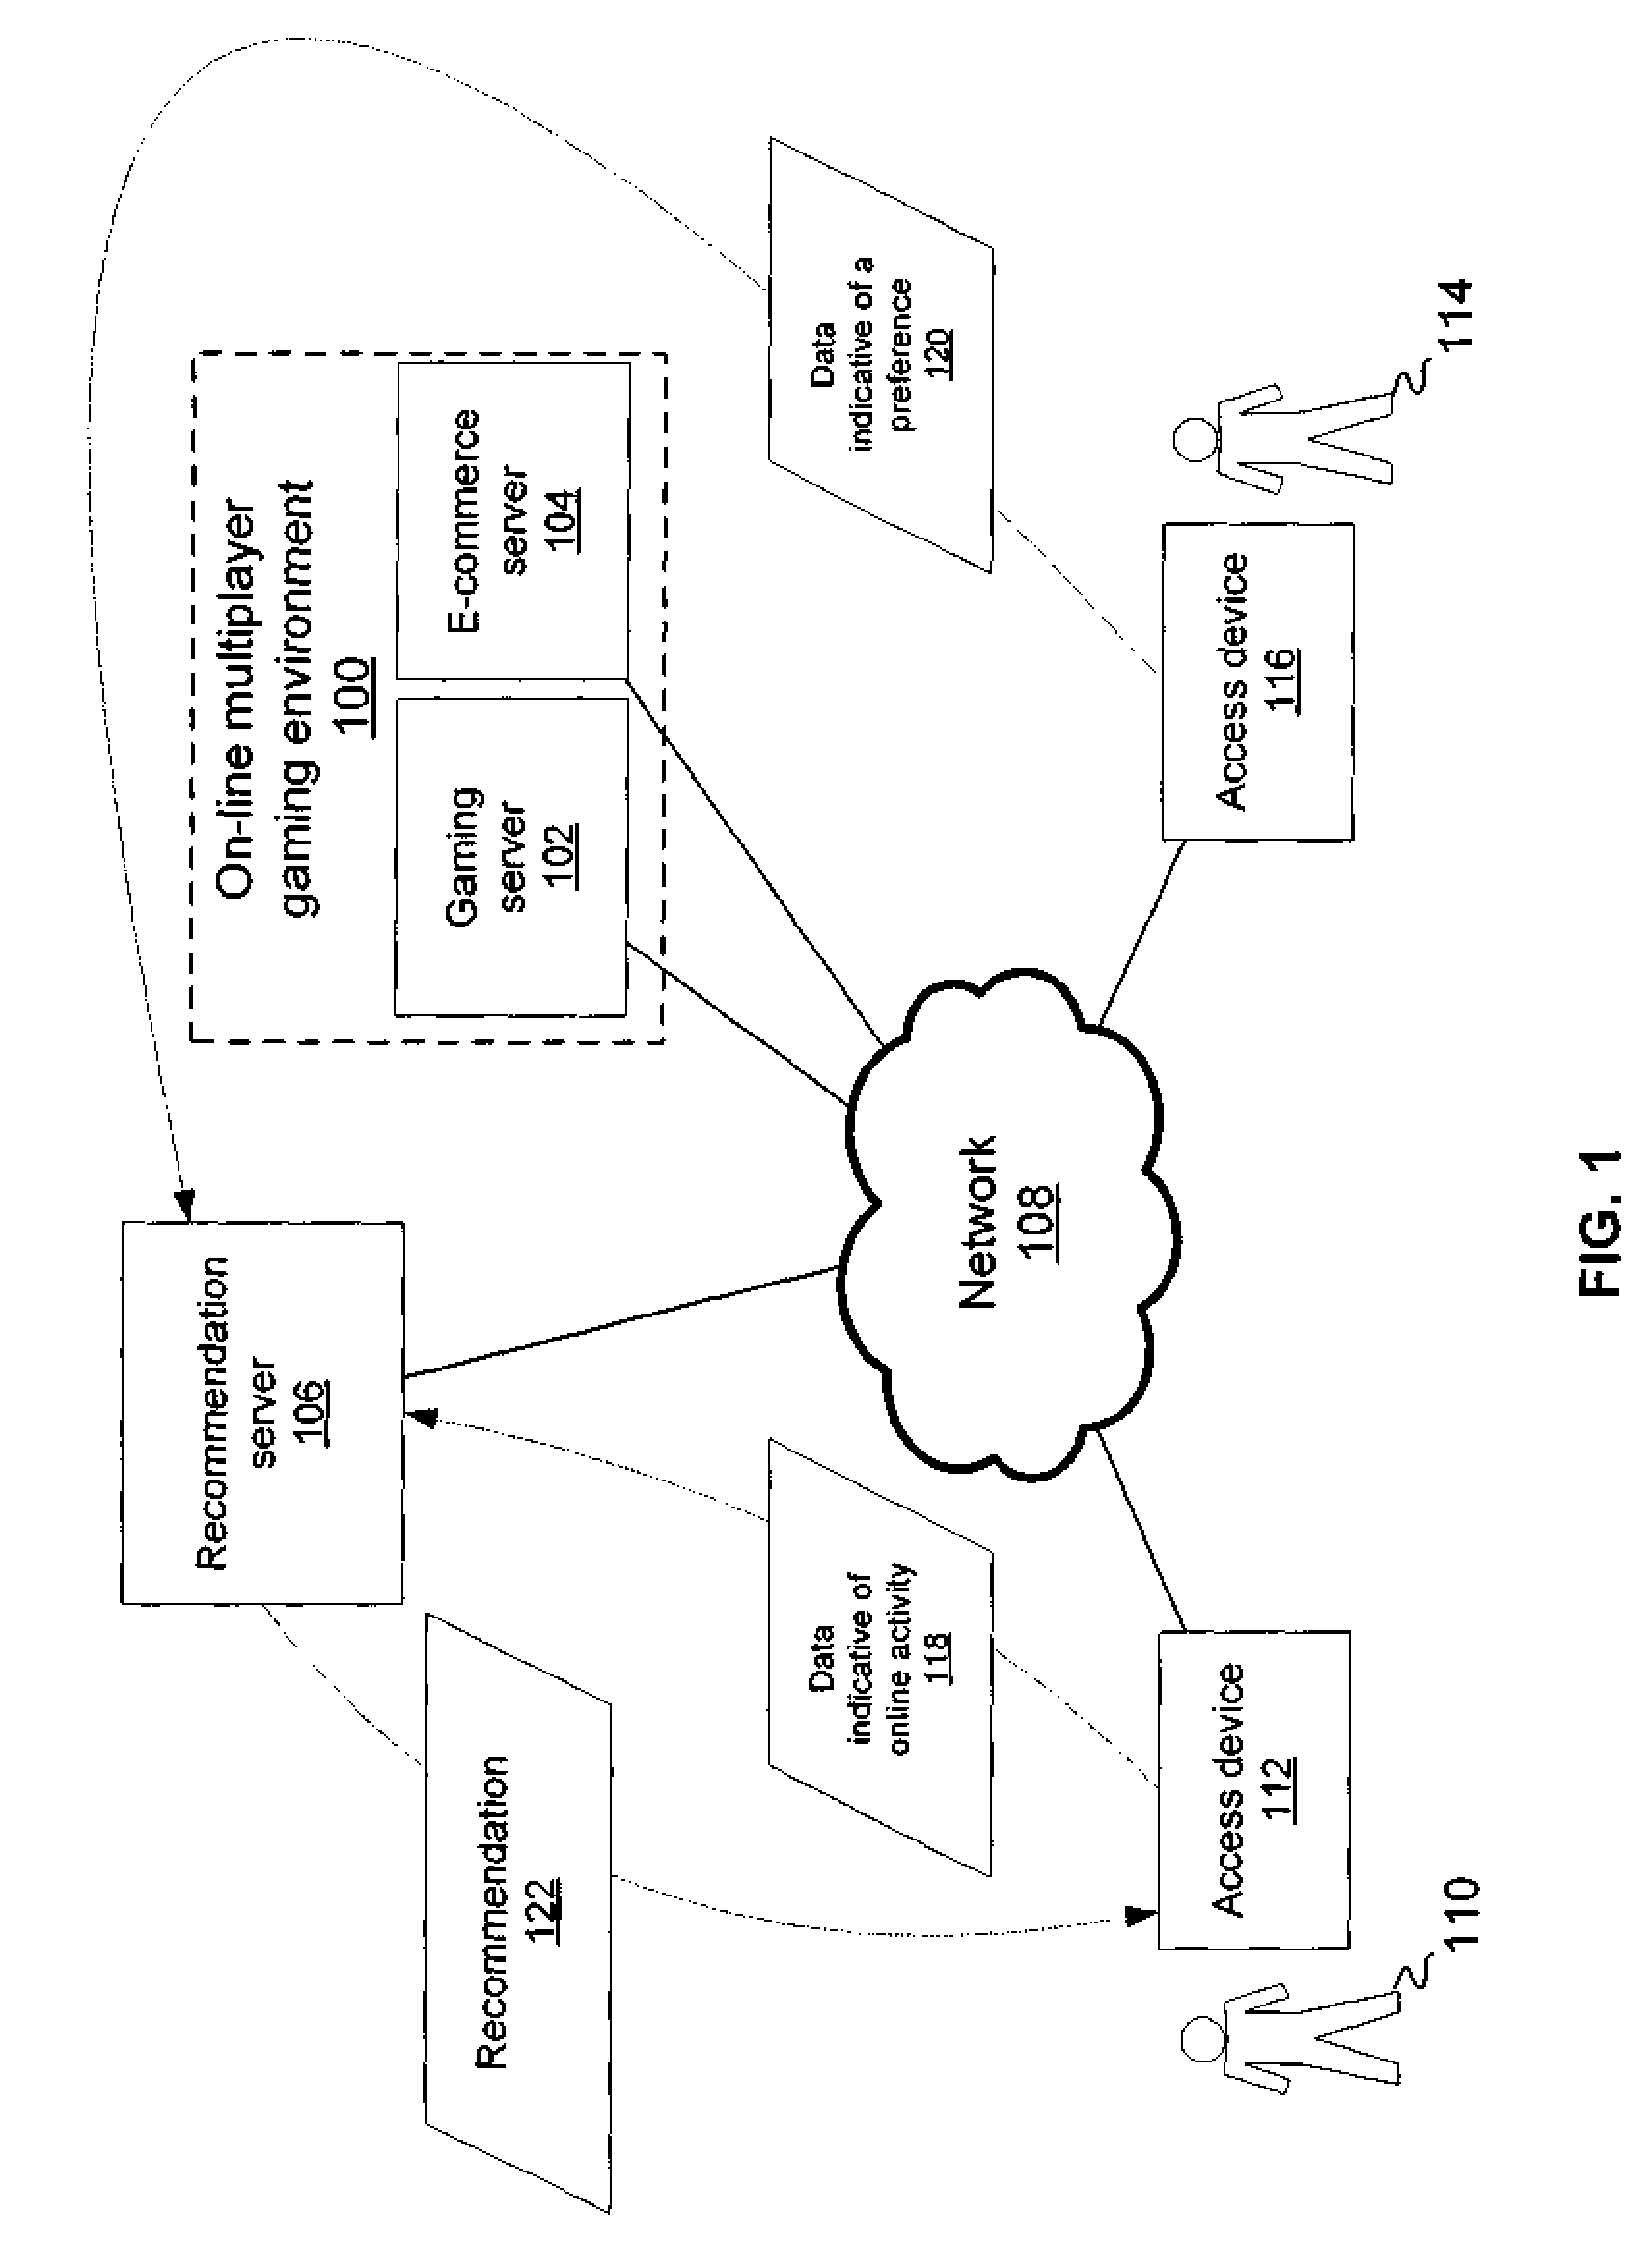 System and method for targeted recommendations using social gaming networks